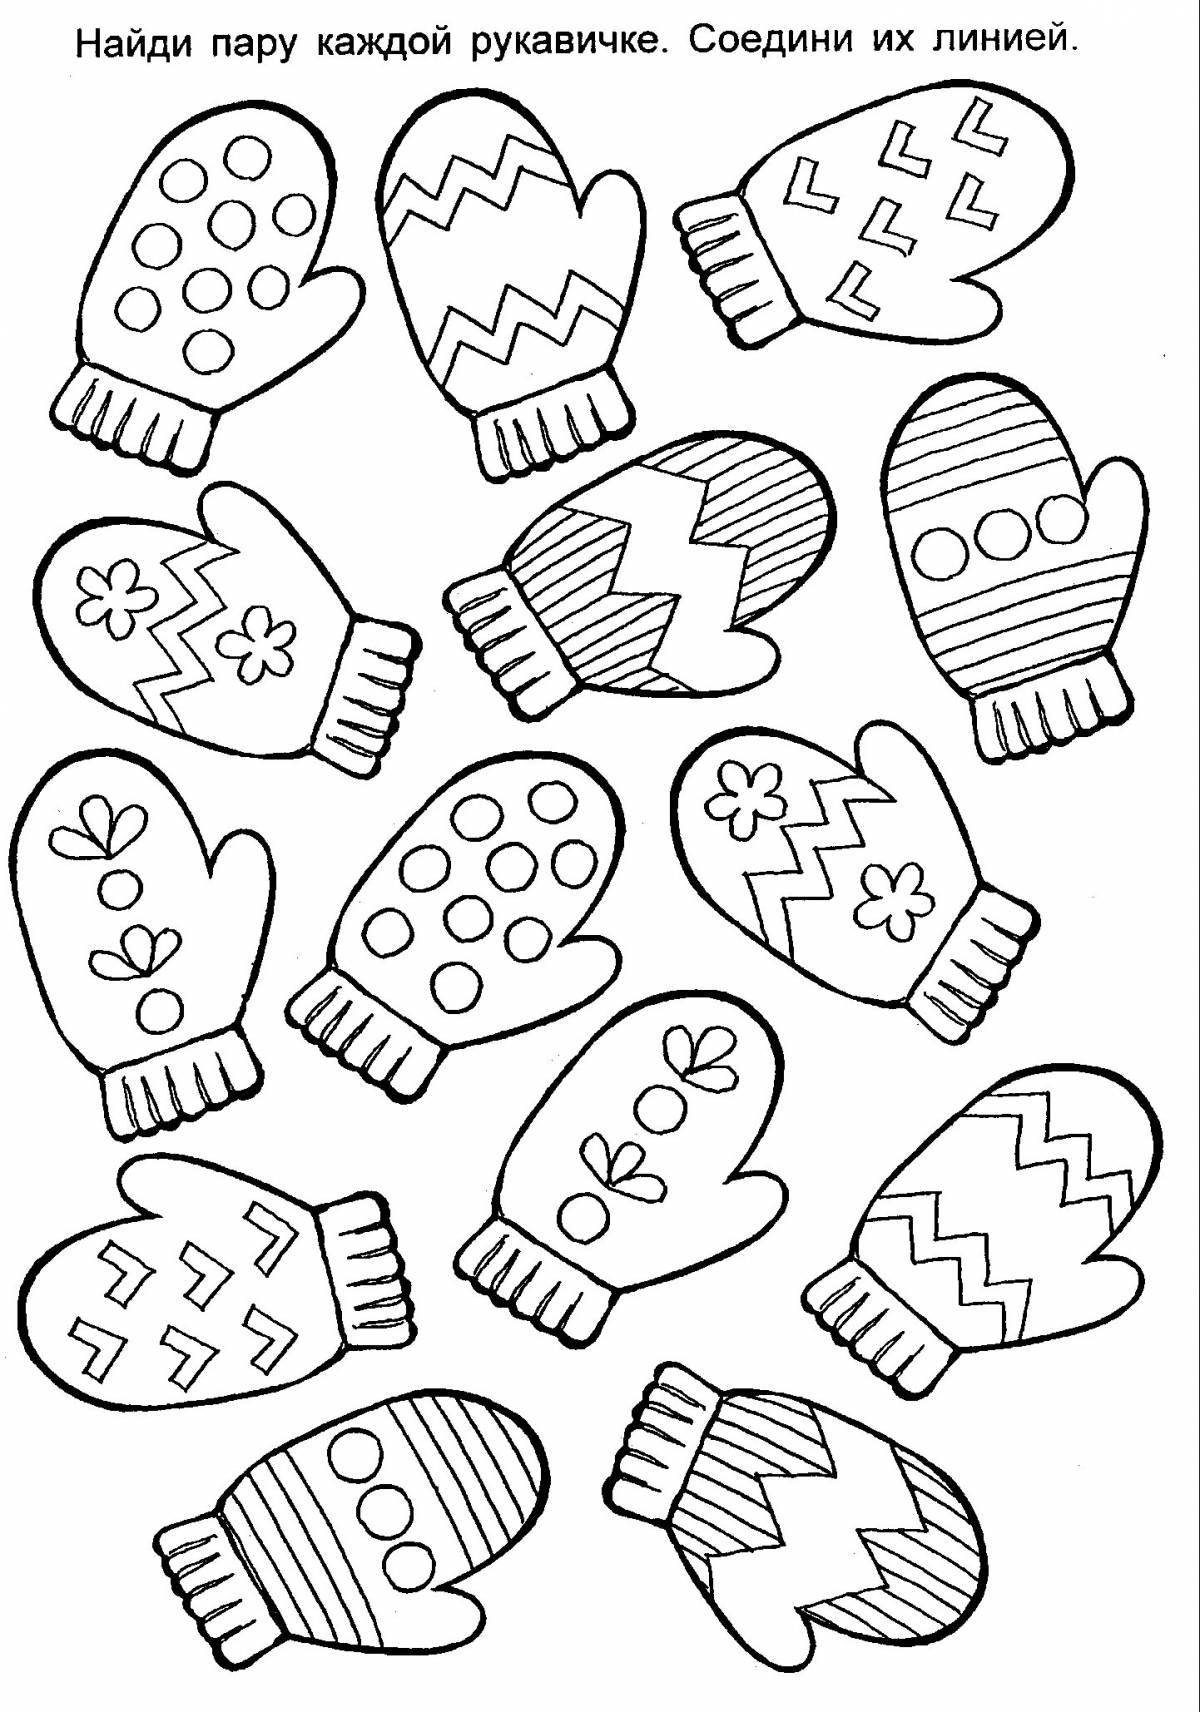 Awesome mitten coloring pages for 5-6 year olds